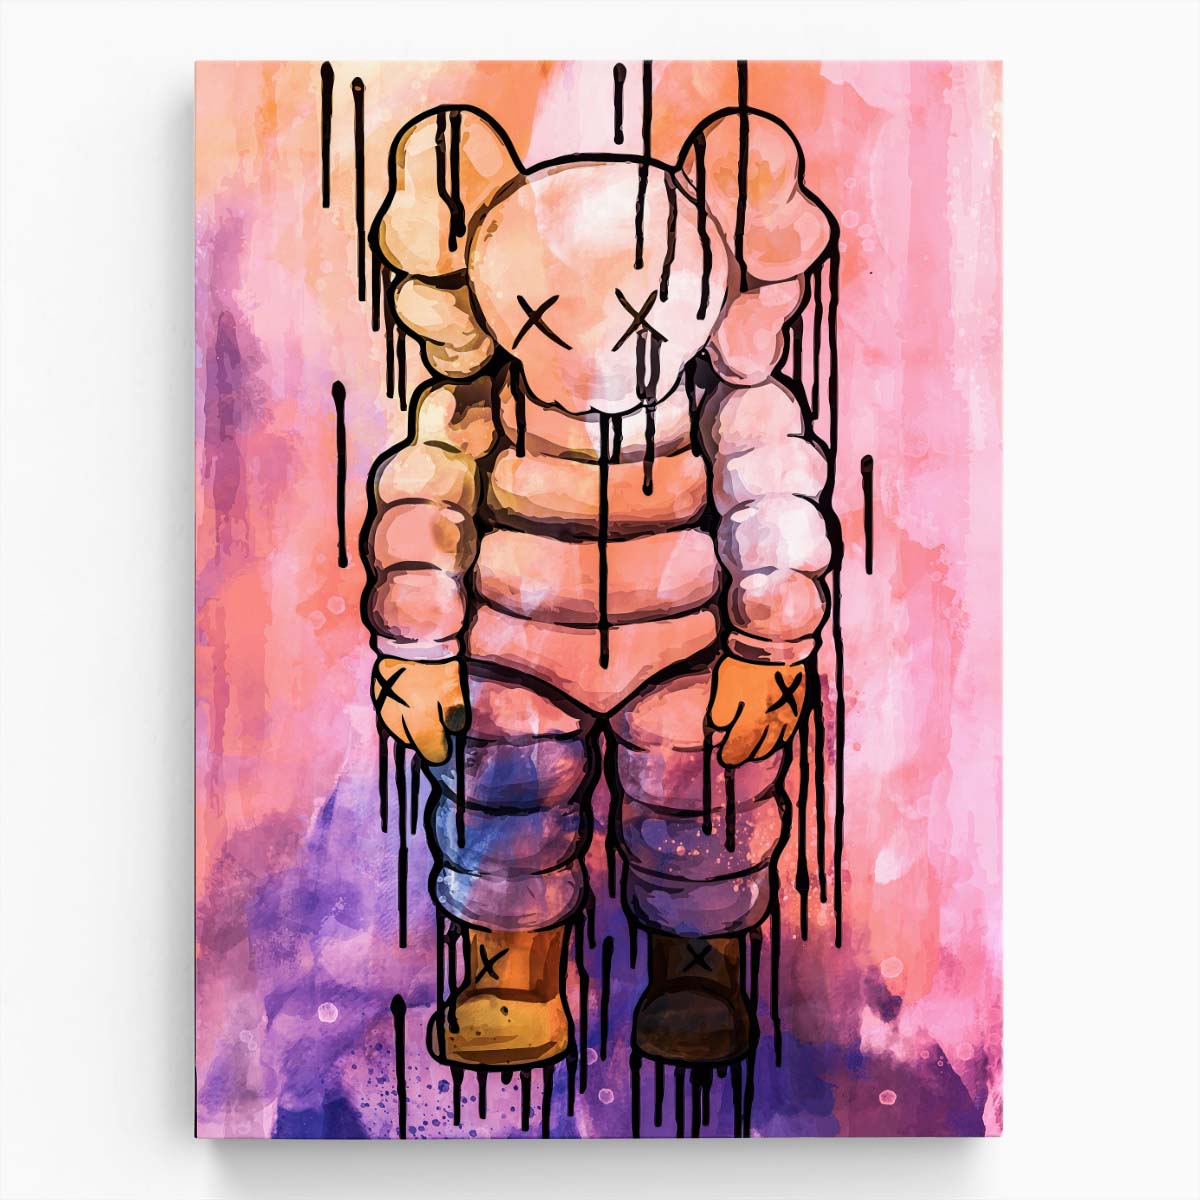 Tired Fat Kaws What Party Wall Art by Luxuriance Designs. Made in USA.